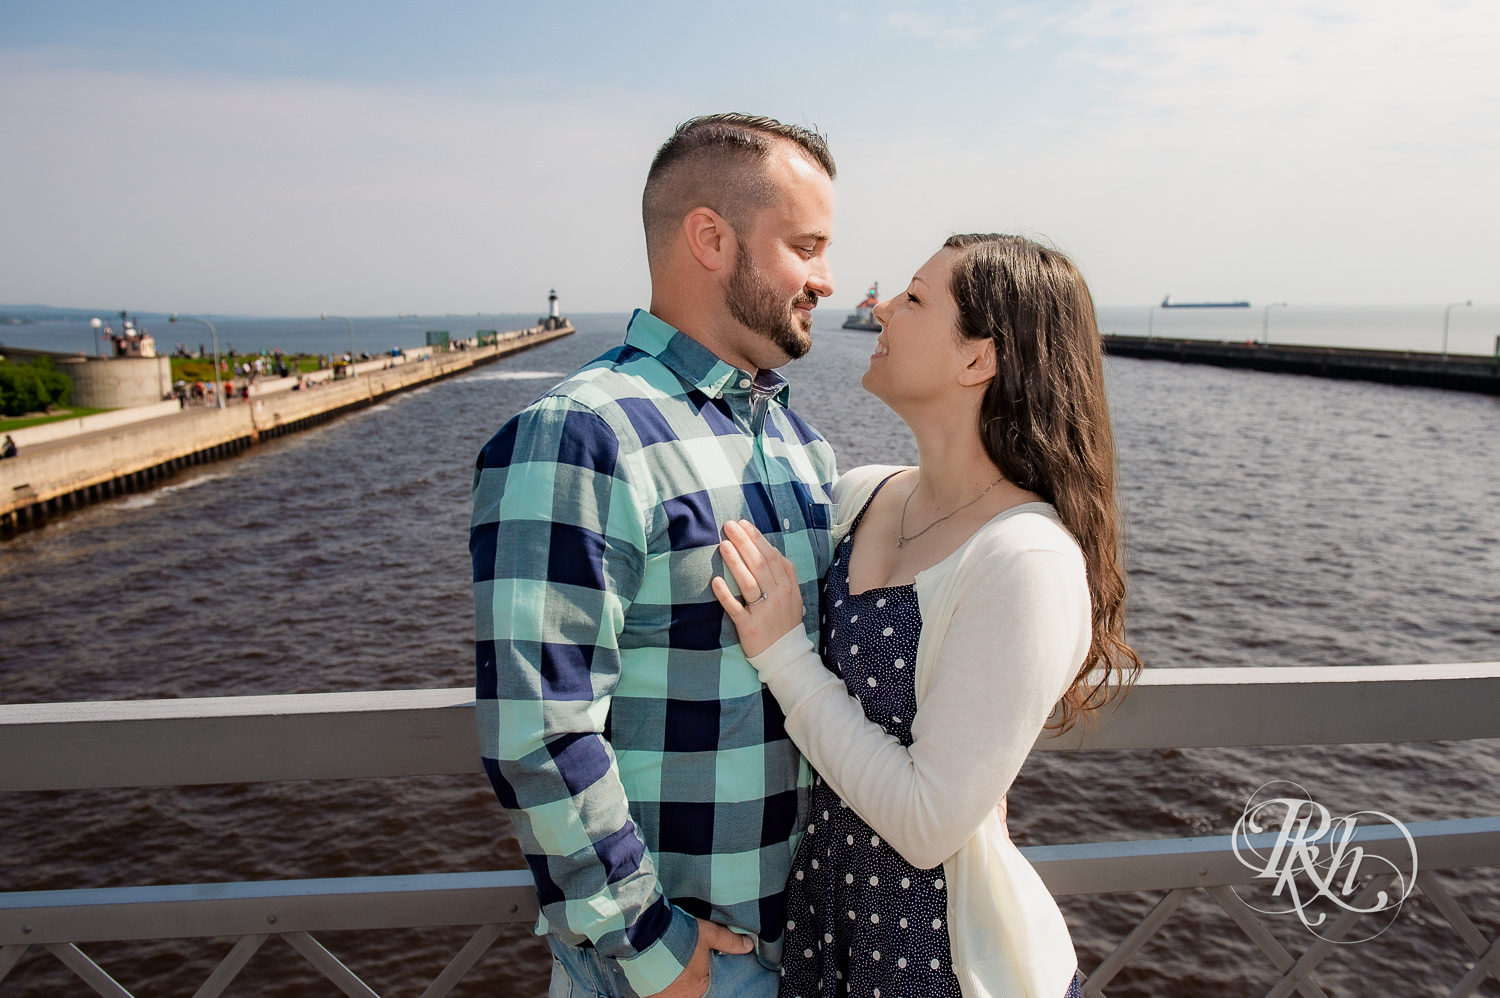 Man and woman smile with Lake Superior in the background in Duluth, Minnesota.